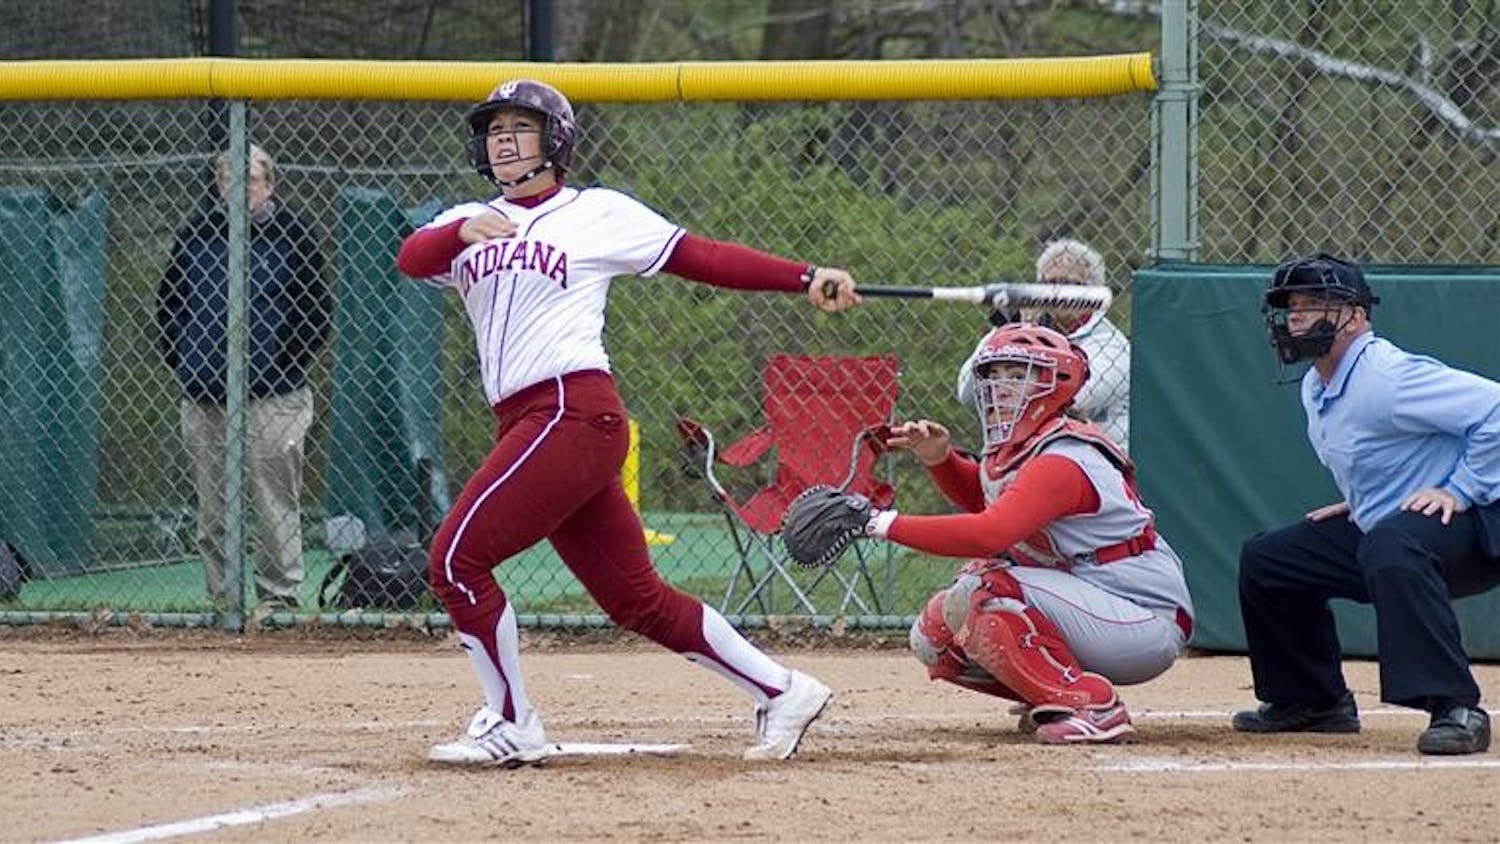 Sophomore pitcher Sara Olson hits a foul ball during the first game of a double-header against Ohio State on Wednesday afternoon at the IU Softball Field. Olson pitched a no-hitter in the second game.